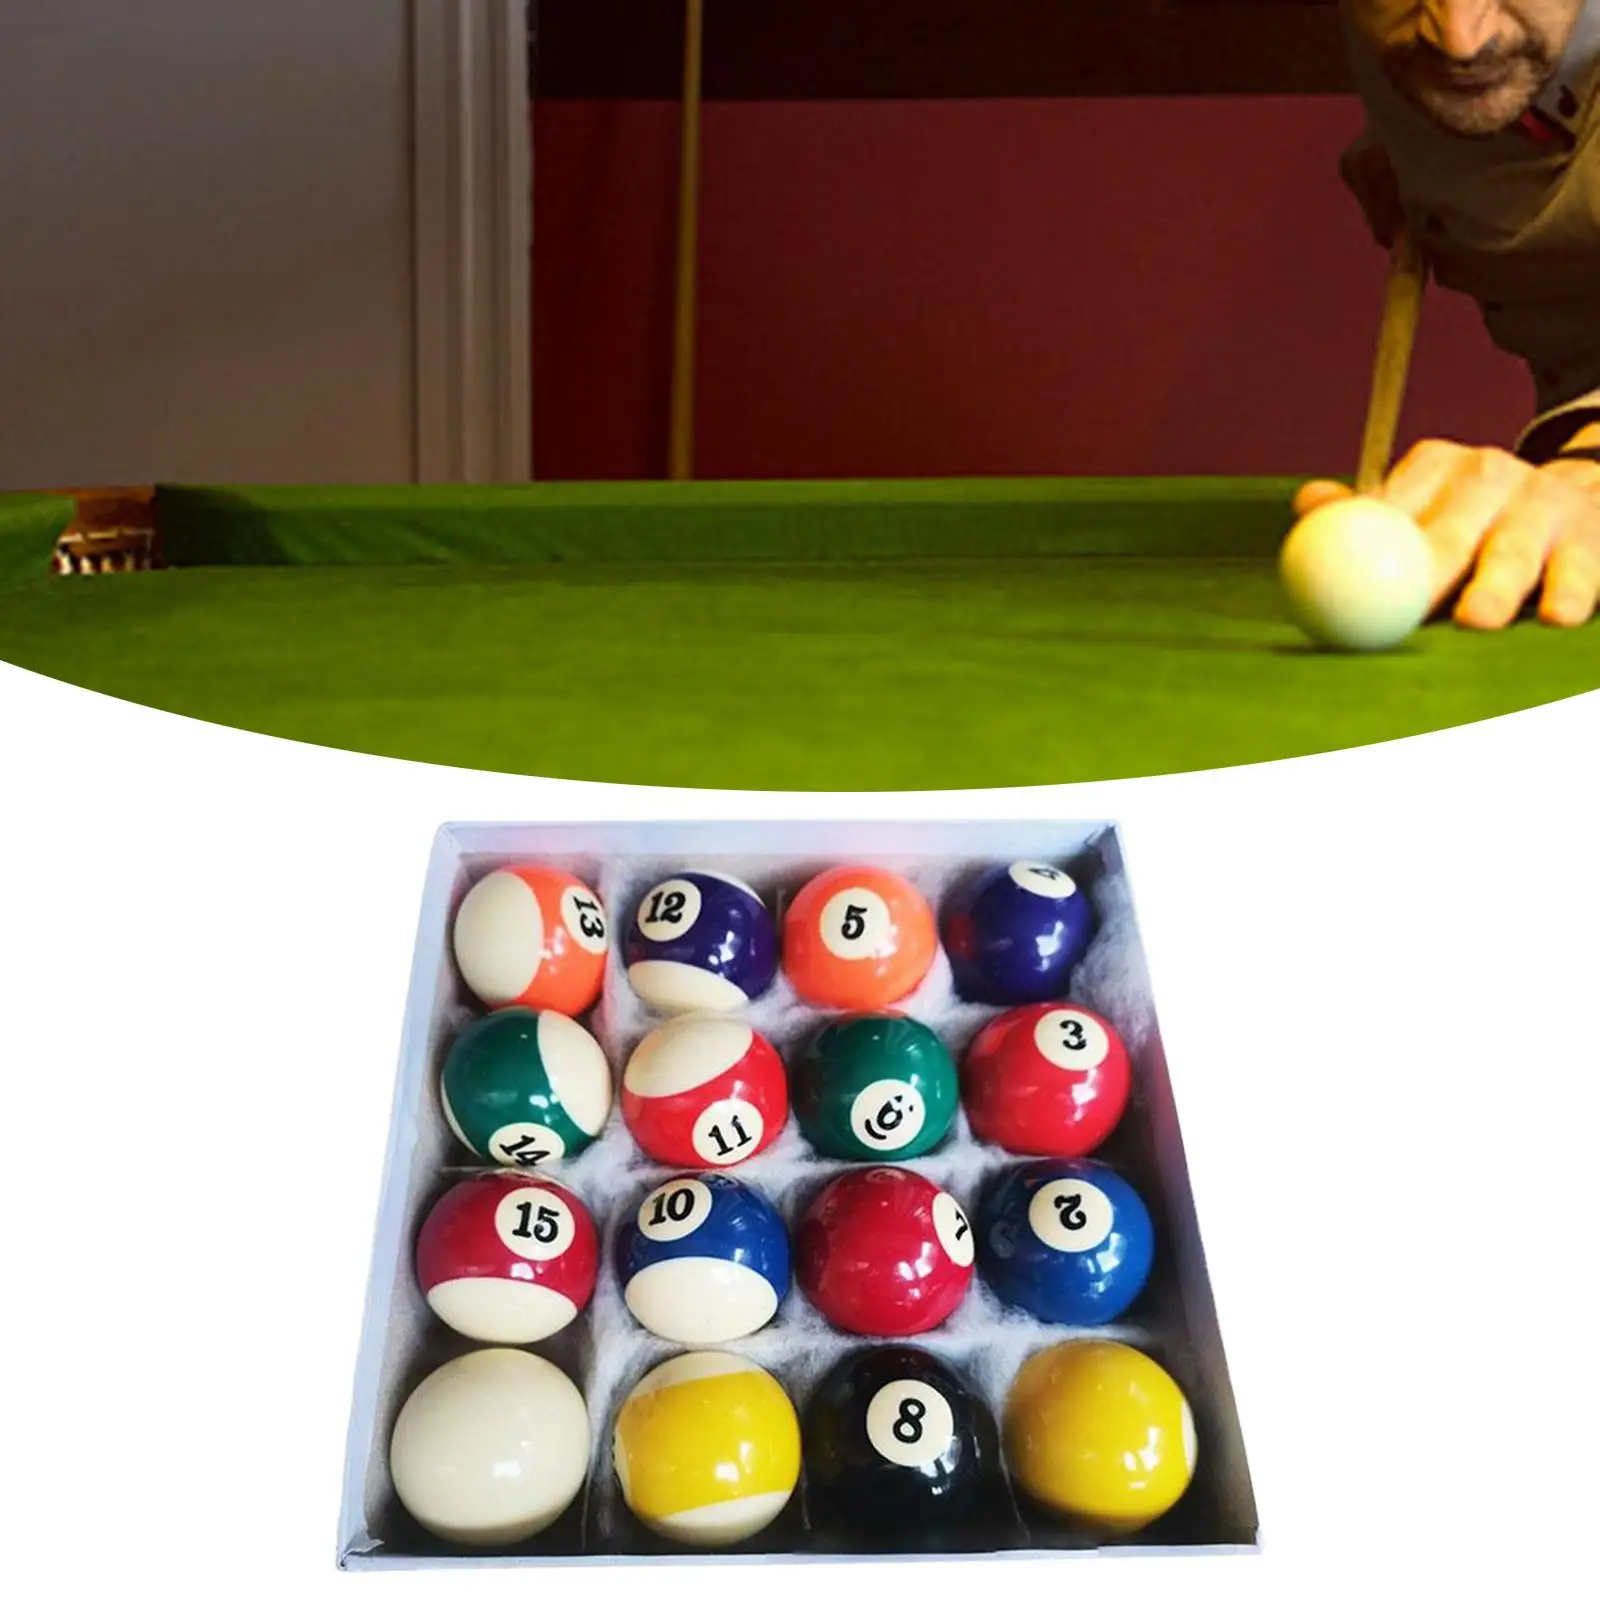 16x Billiard Balls Pool Balls Complete 16 Balls for Pool Tables for Exercise